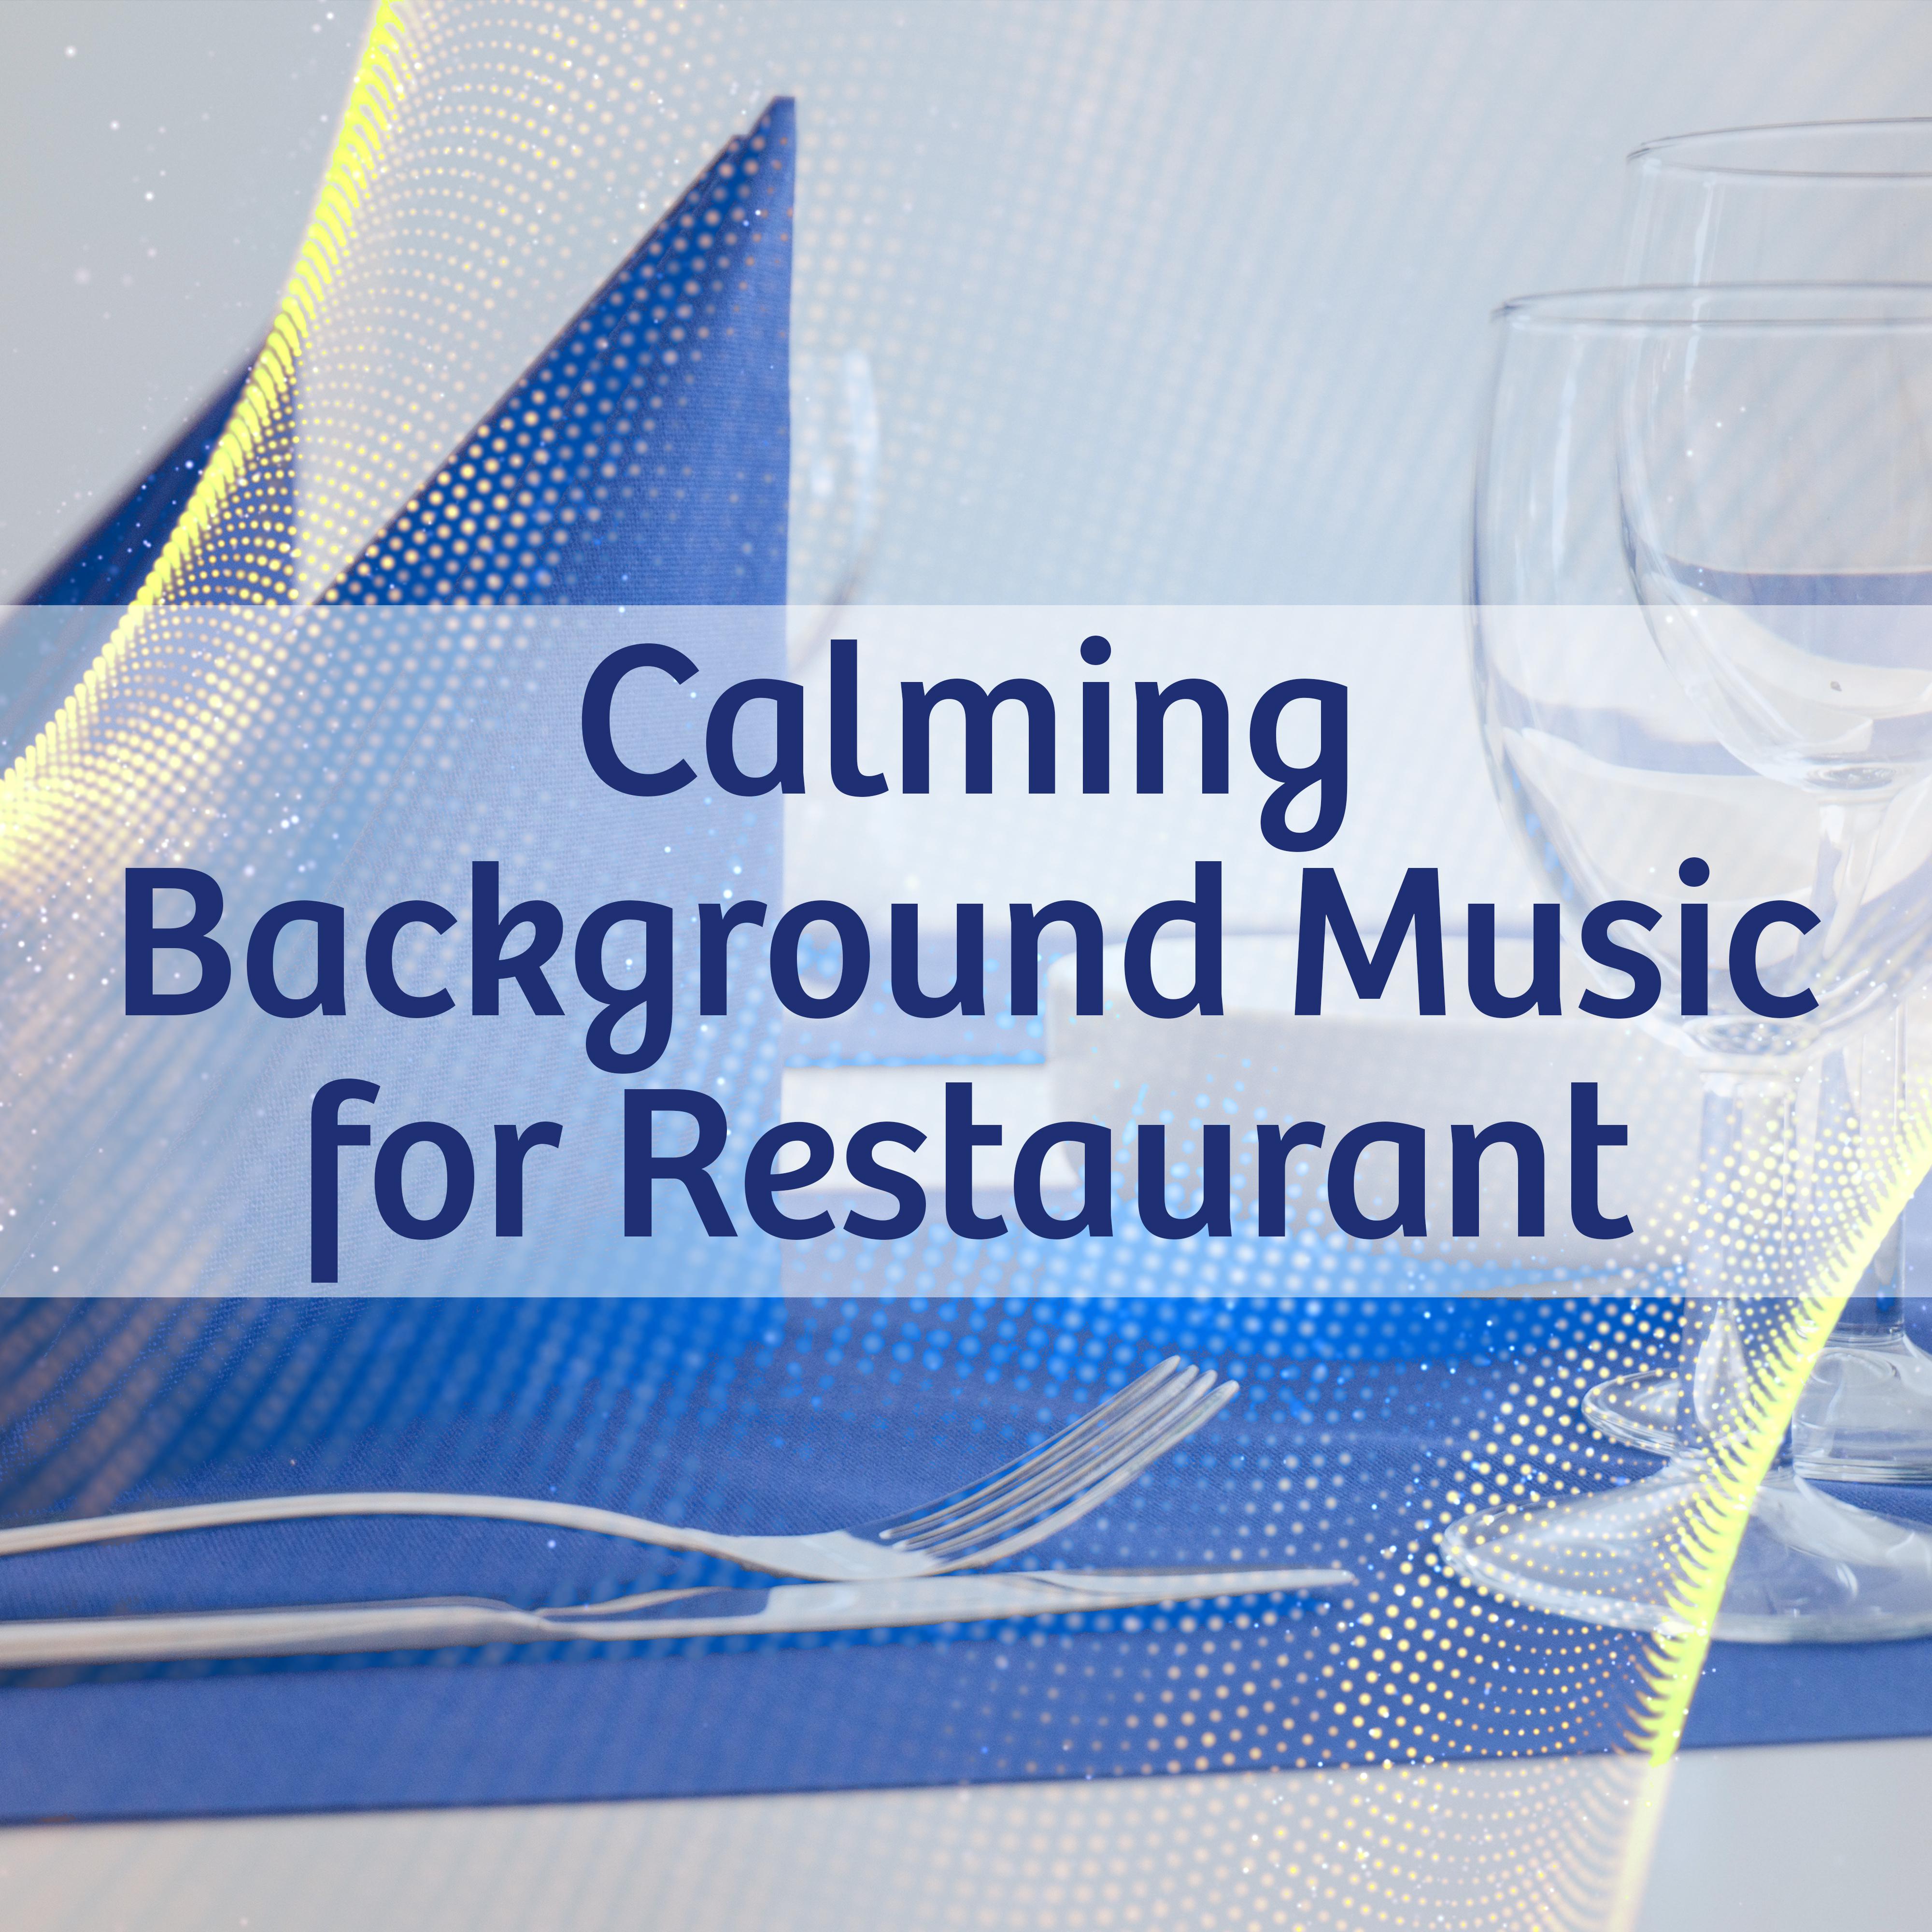 Calming Background Music for Restaurant – Jazz Music to Rest, Soft Sounds, Family Dinner, Coffee Time